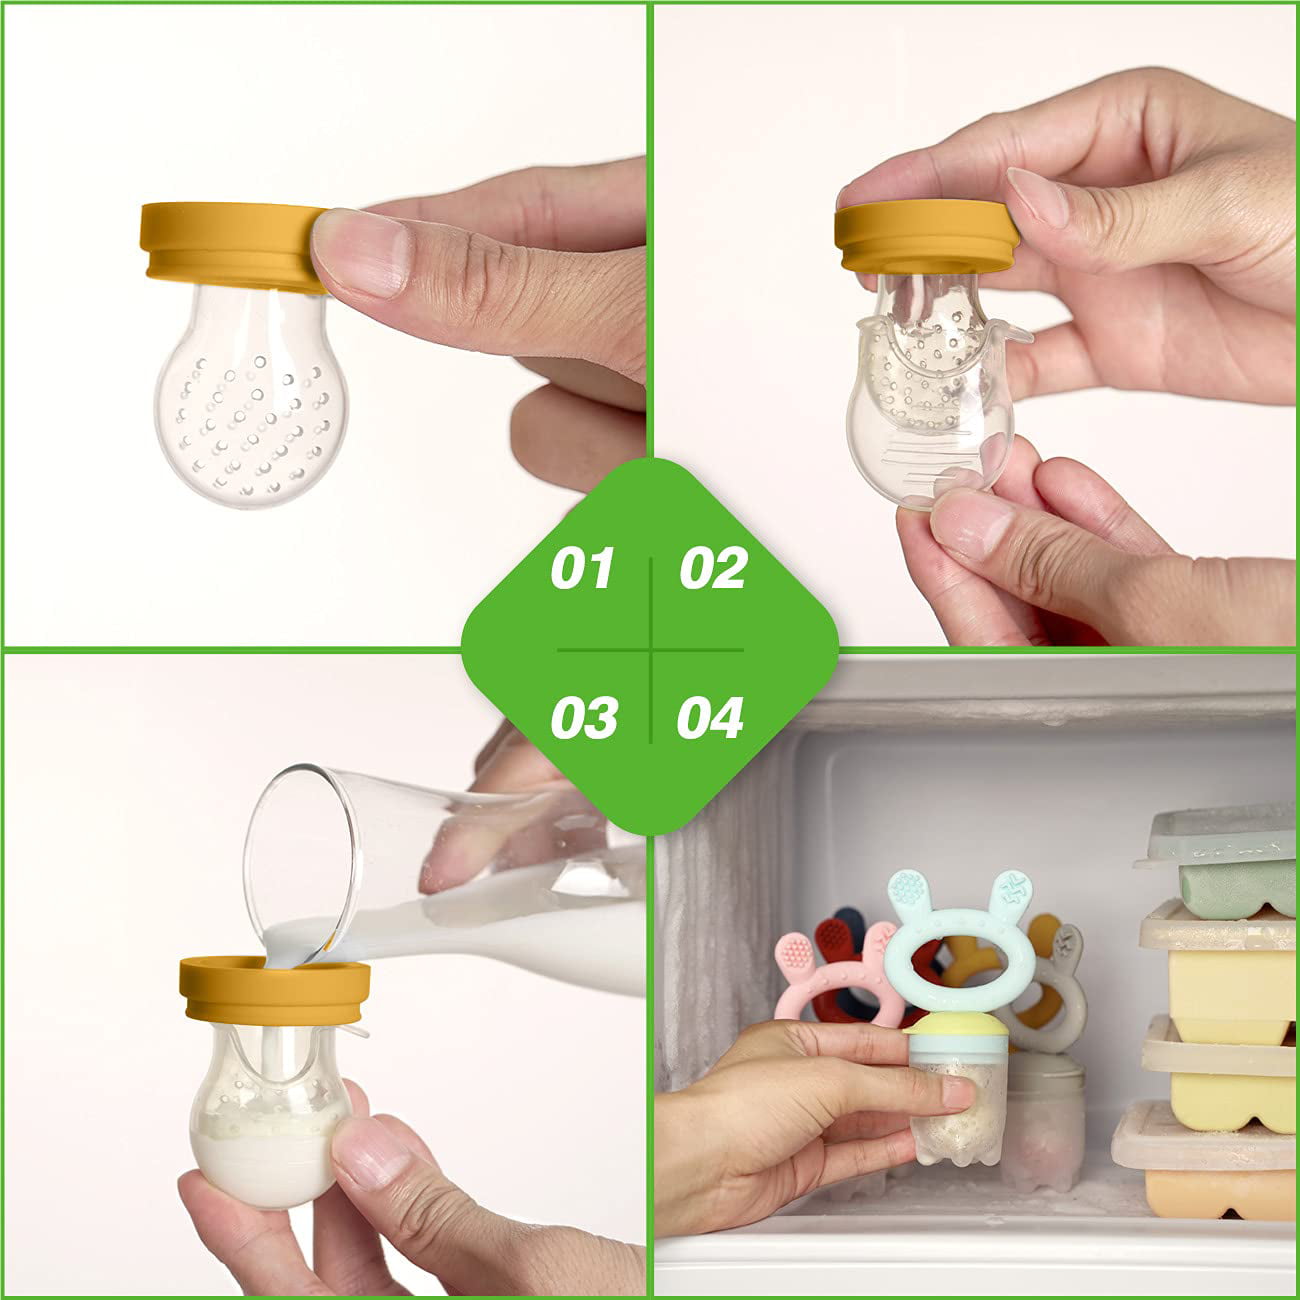 Silicone Baby Food Feeder/Fruit Feeder Pacifier